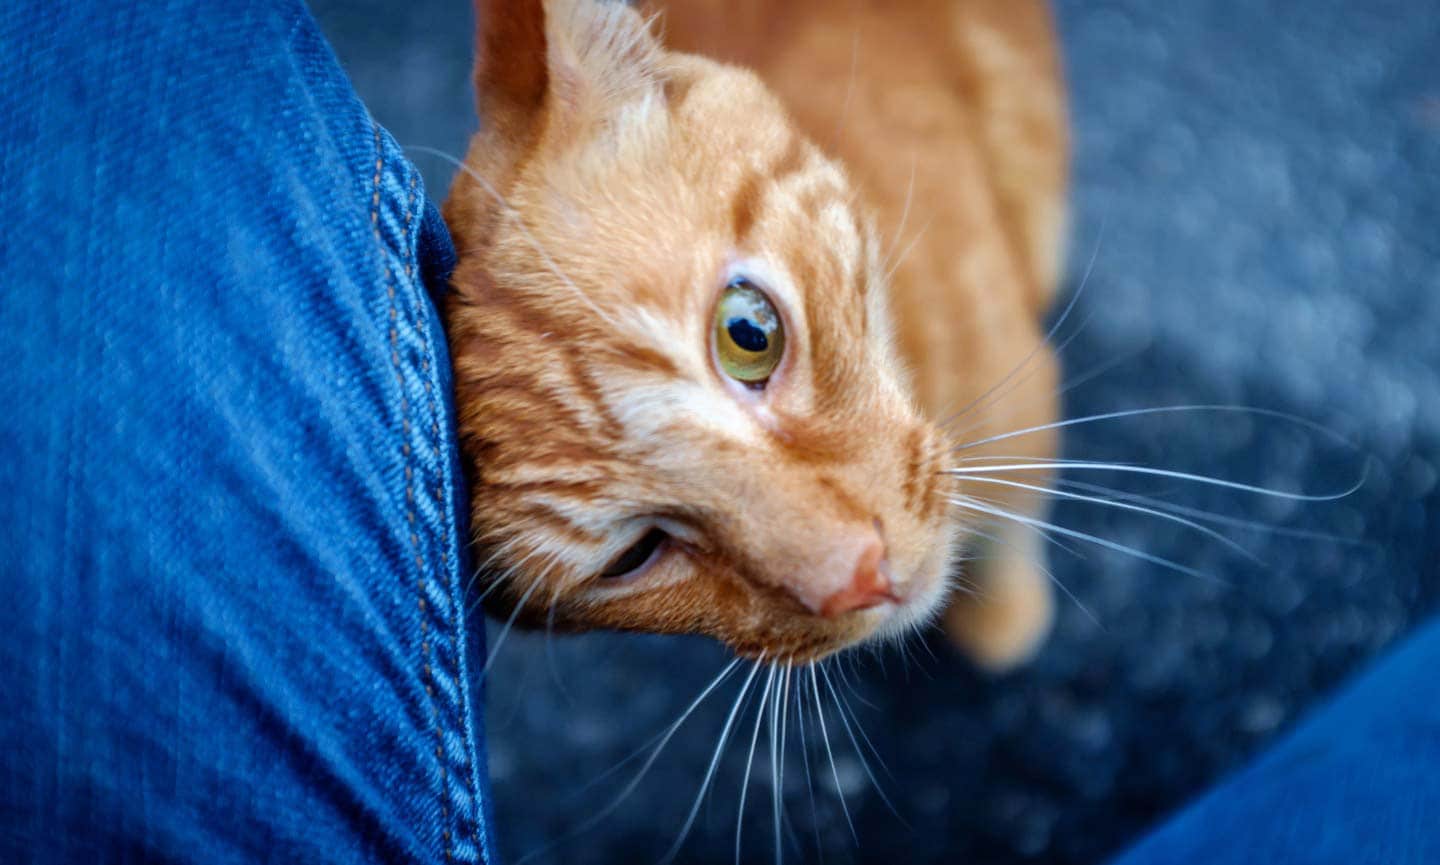 Photo of a cat rubbing their head on a person's leg